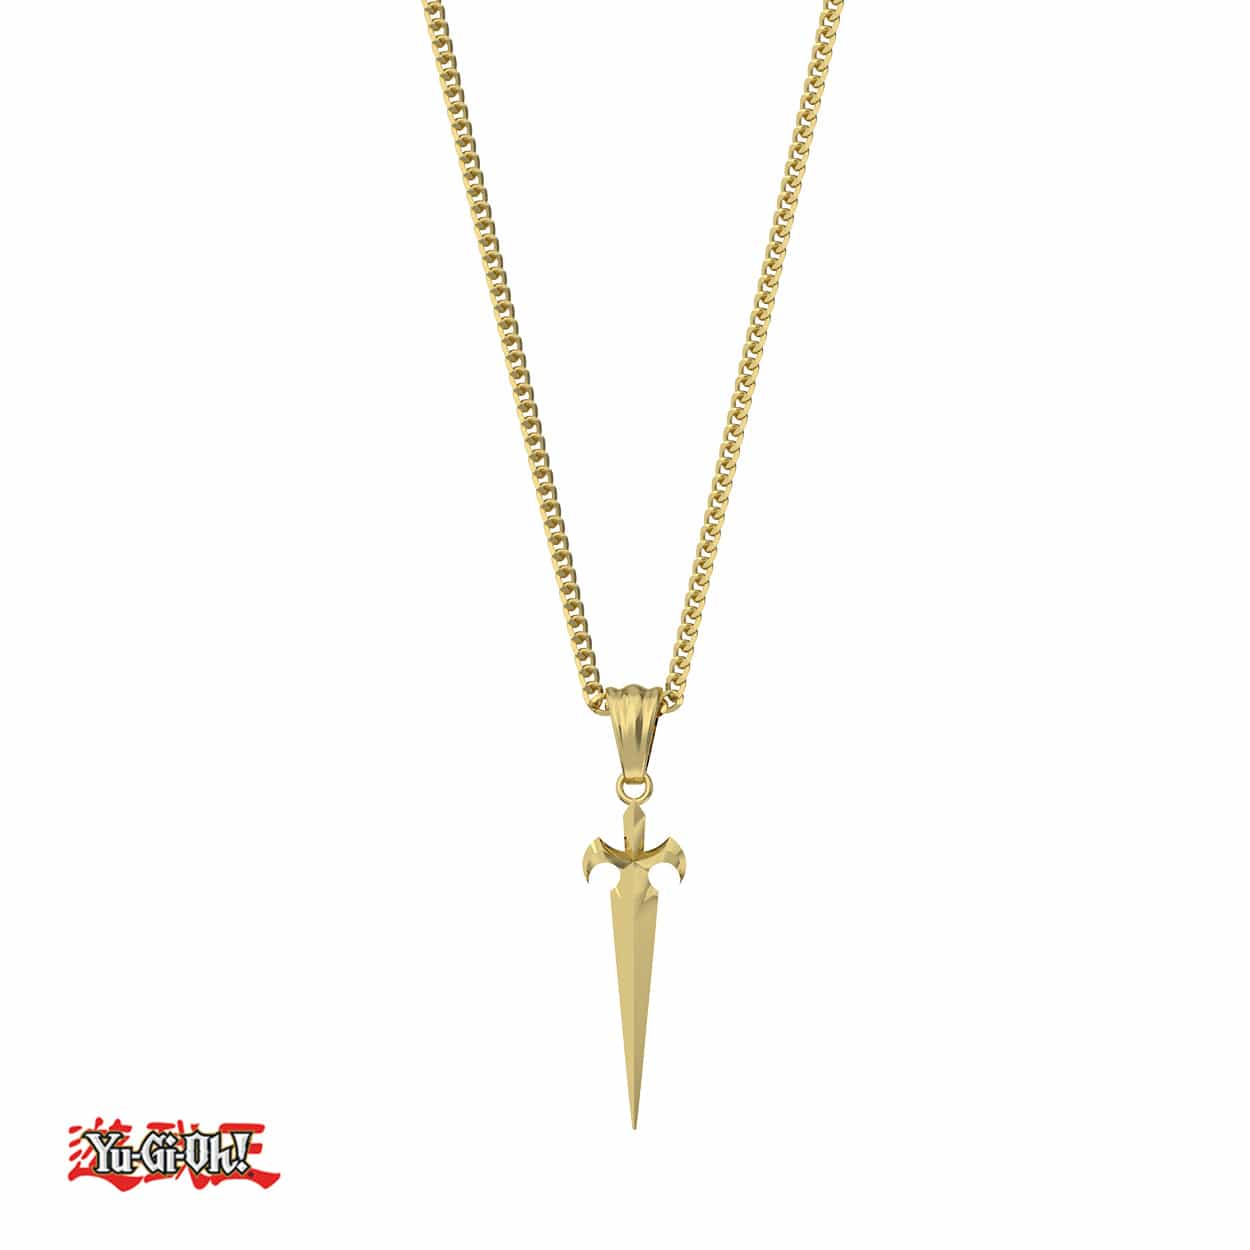 Yu-Gi-Oh!™ Sword Of Concealing Light Necklace